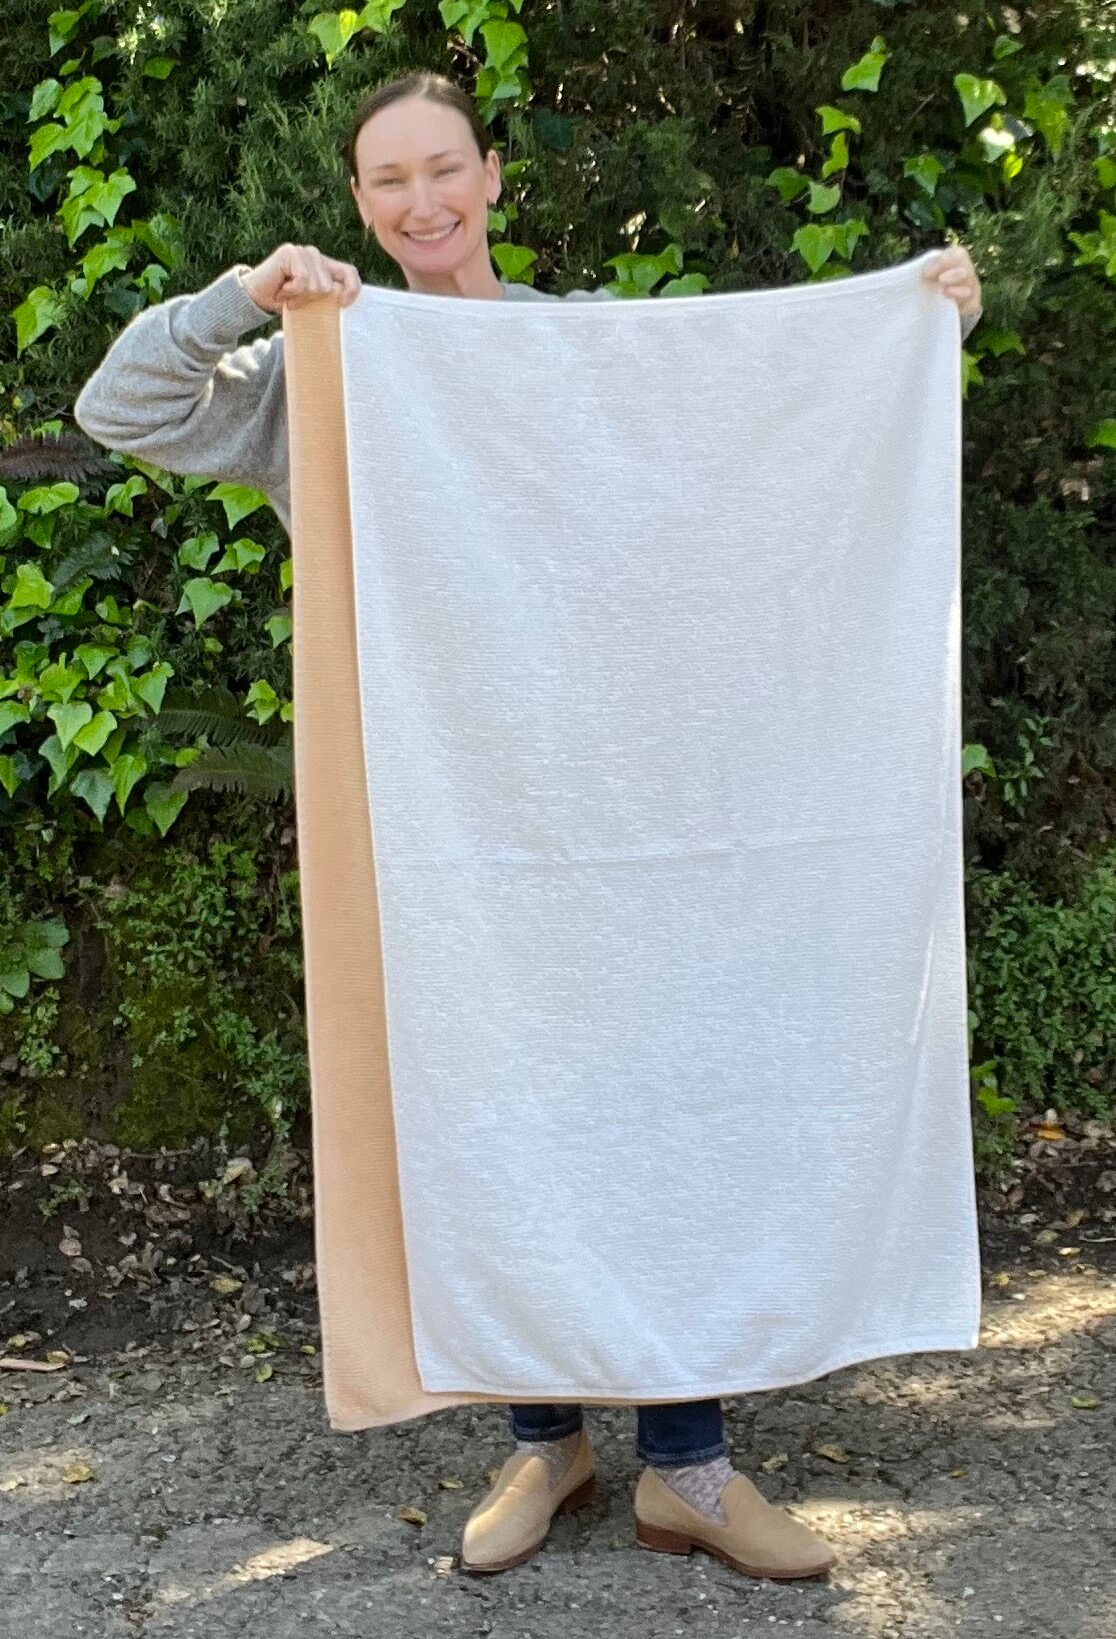 The difference between our standard and petite size bath towels